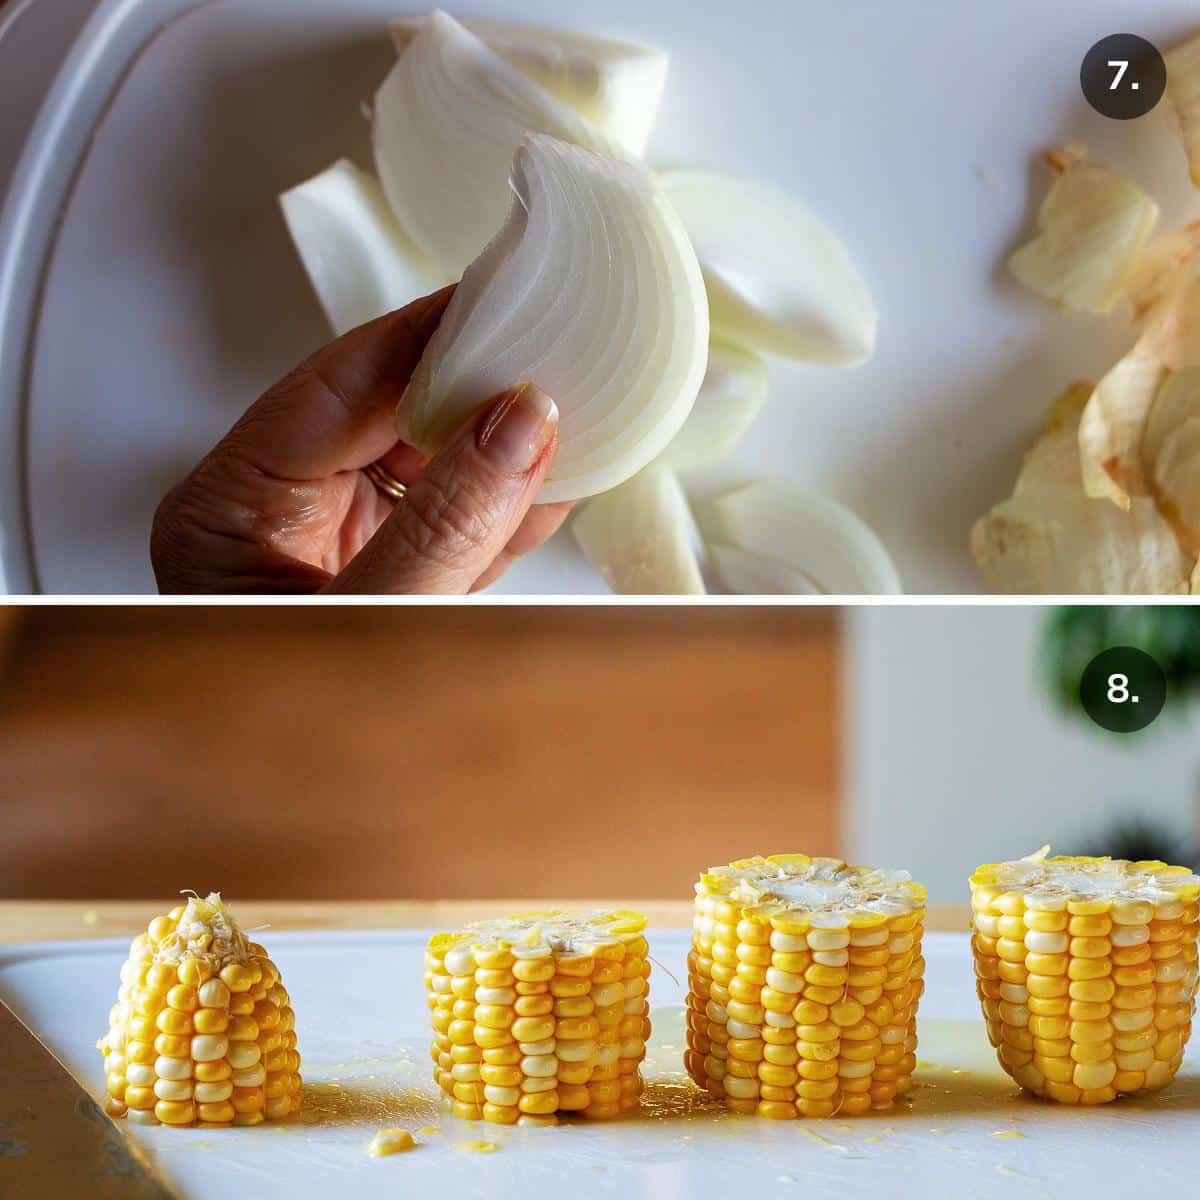 Chopping onion and Corn on the cob. 